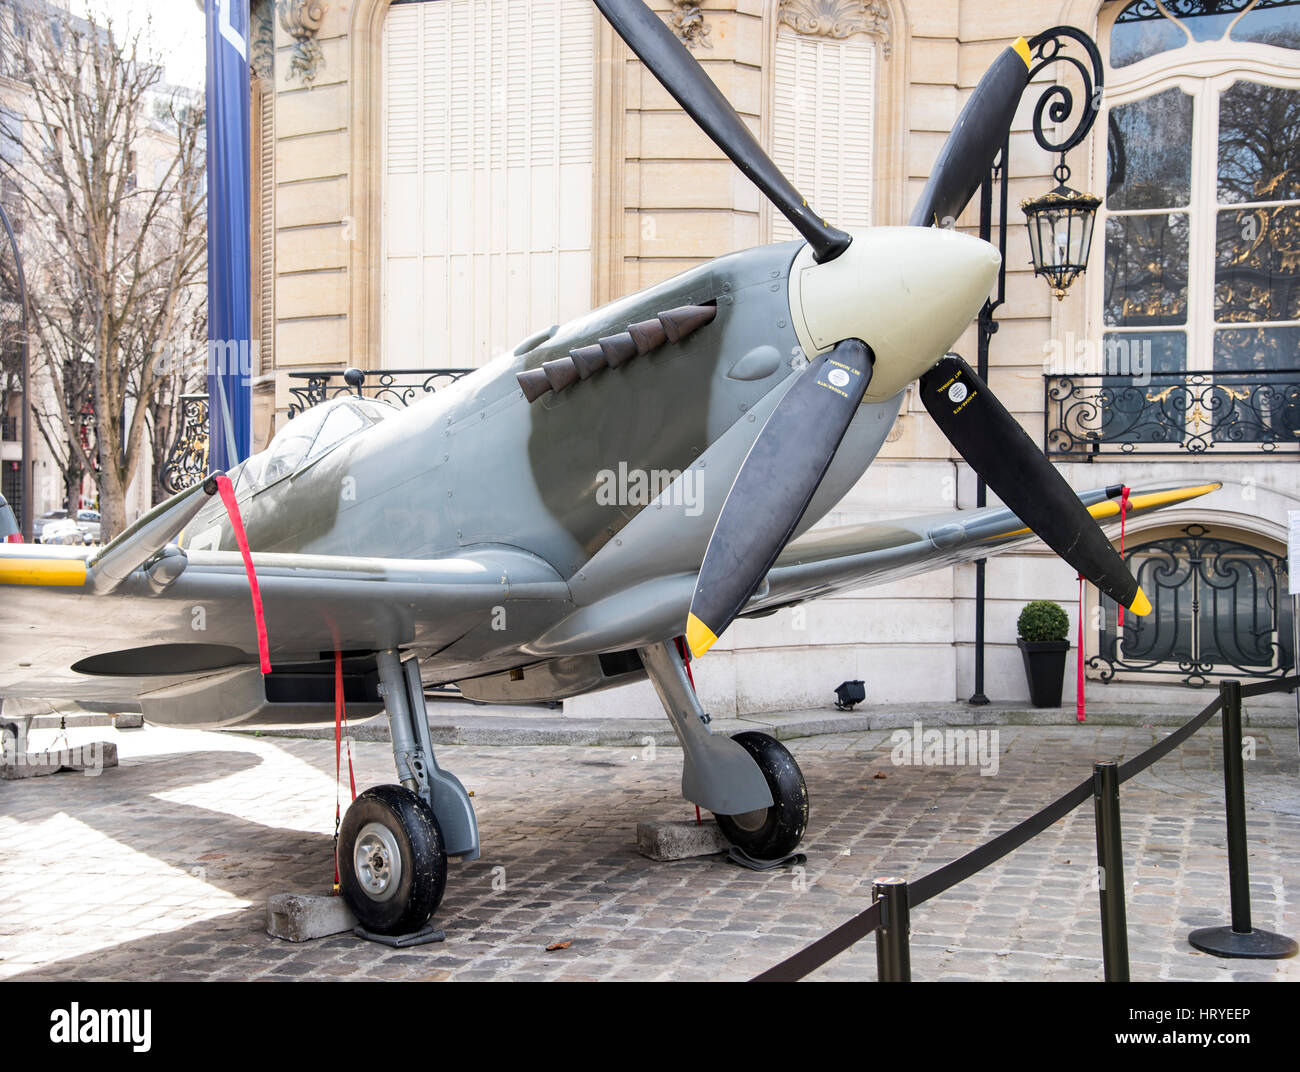 A small propellor powered fighter plane outside a building in Paris France. Stock Photo